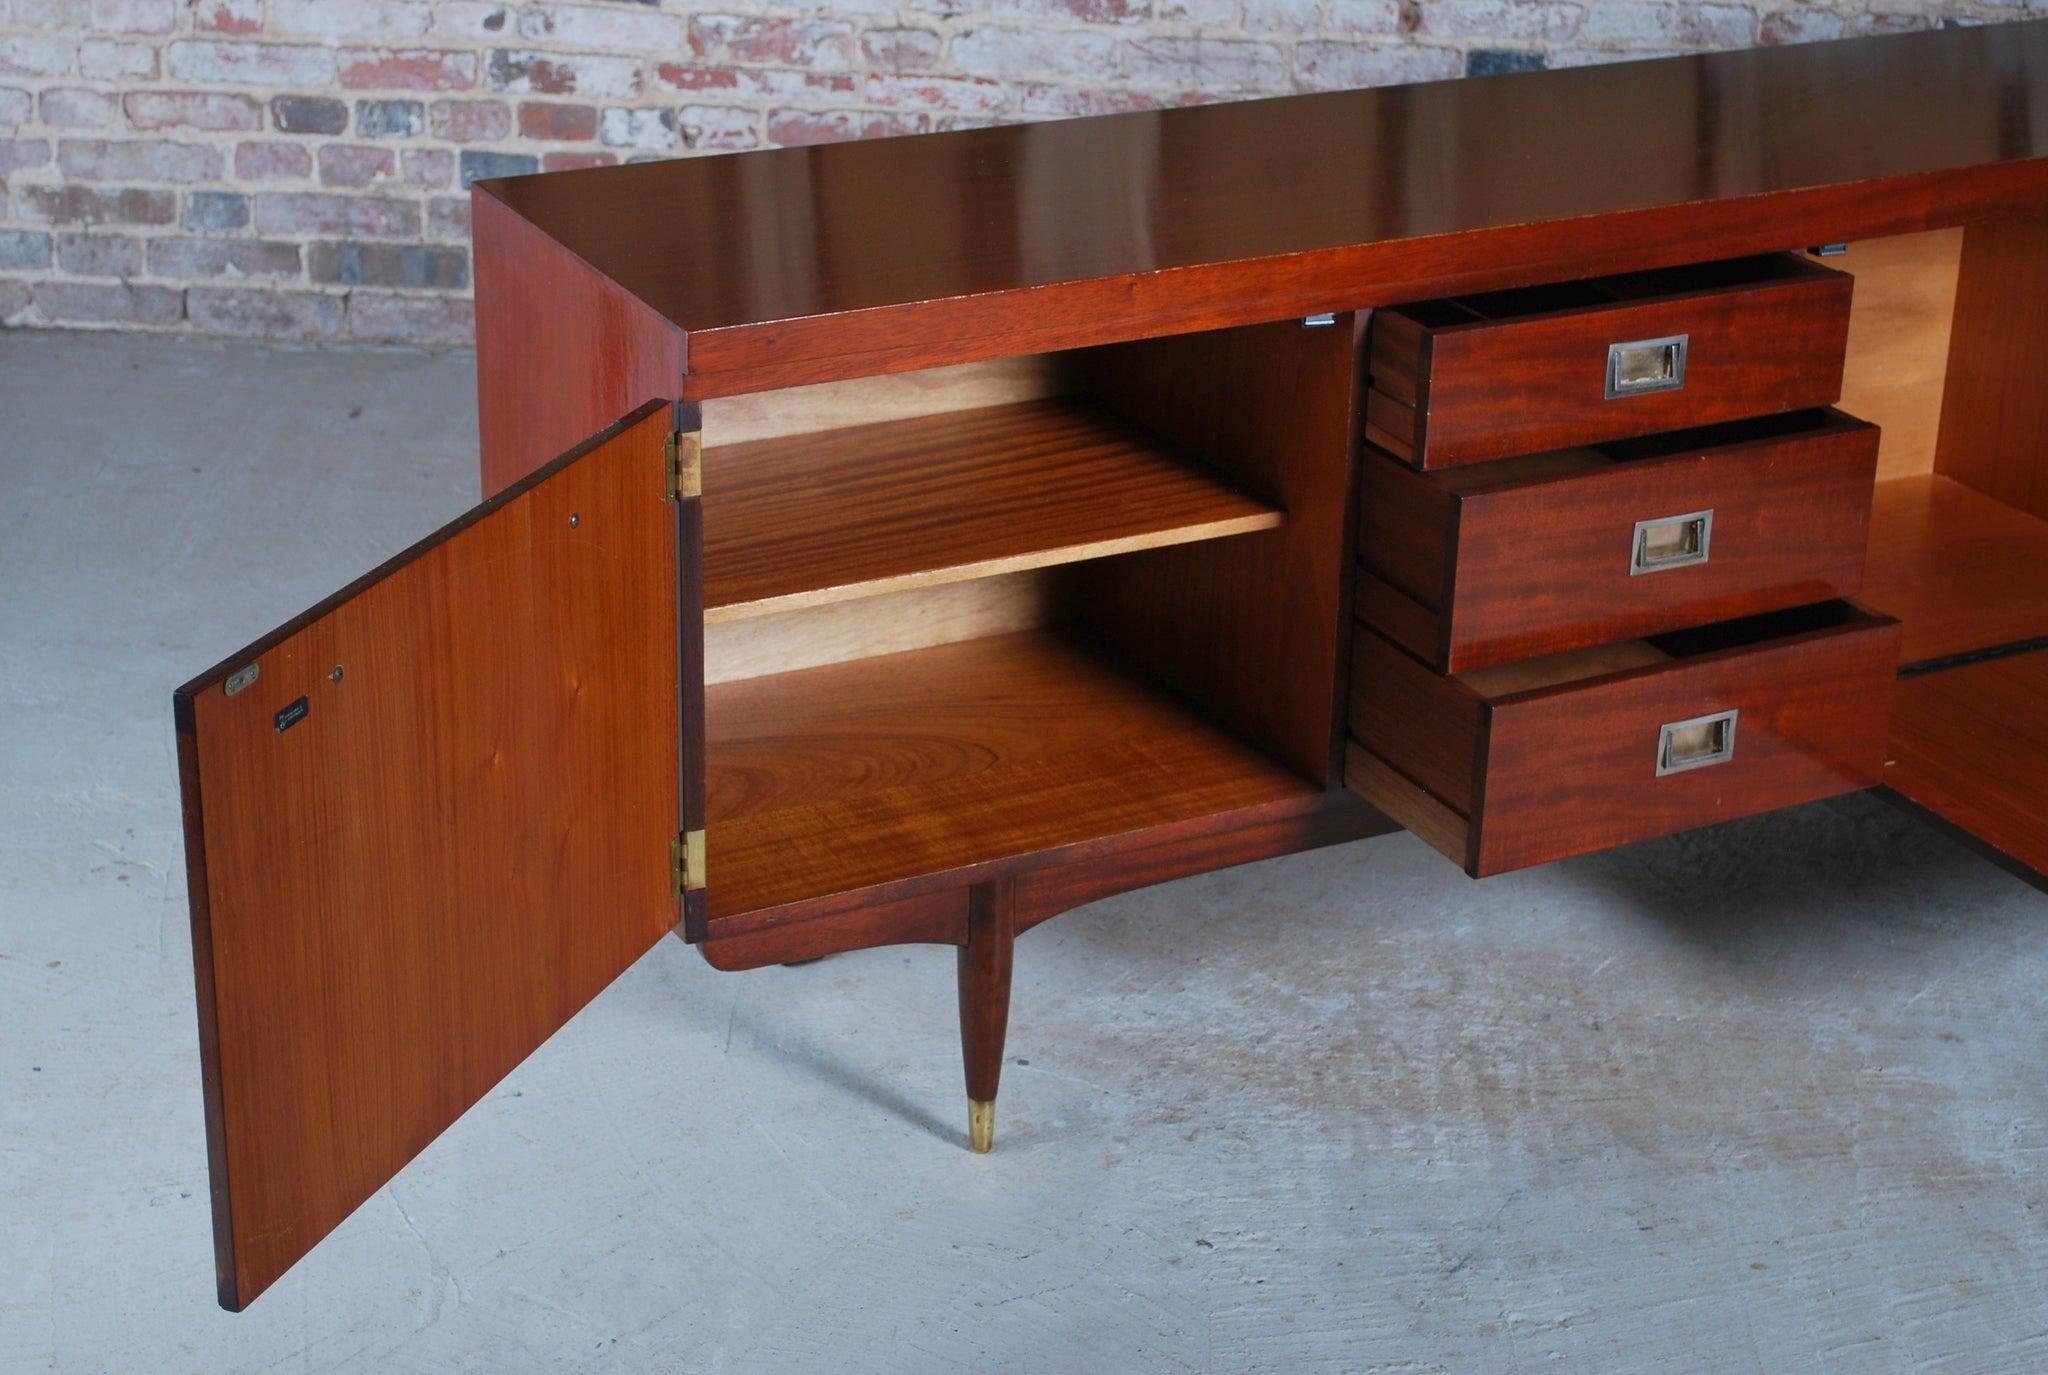 Mid century teak and mahogany long sideboard with brass handles by Greaves&Thomas, stamped 1966. 3 drawers, 2 cabinets and a drinks cabinet. Very good restored condition.

Dimension: W 220cm x H 76cm x D 45cm.